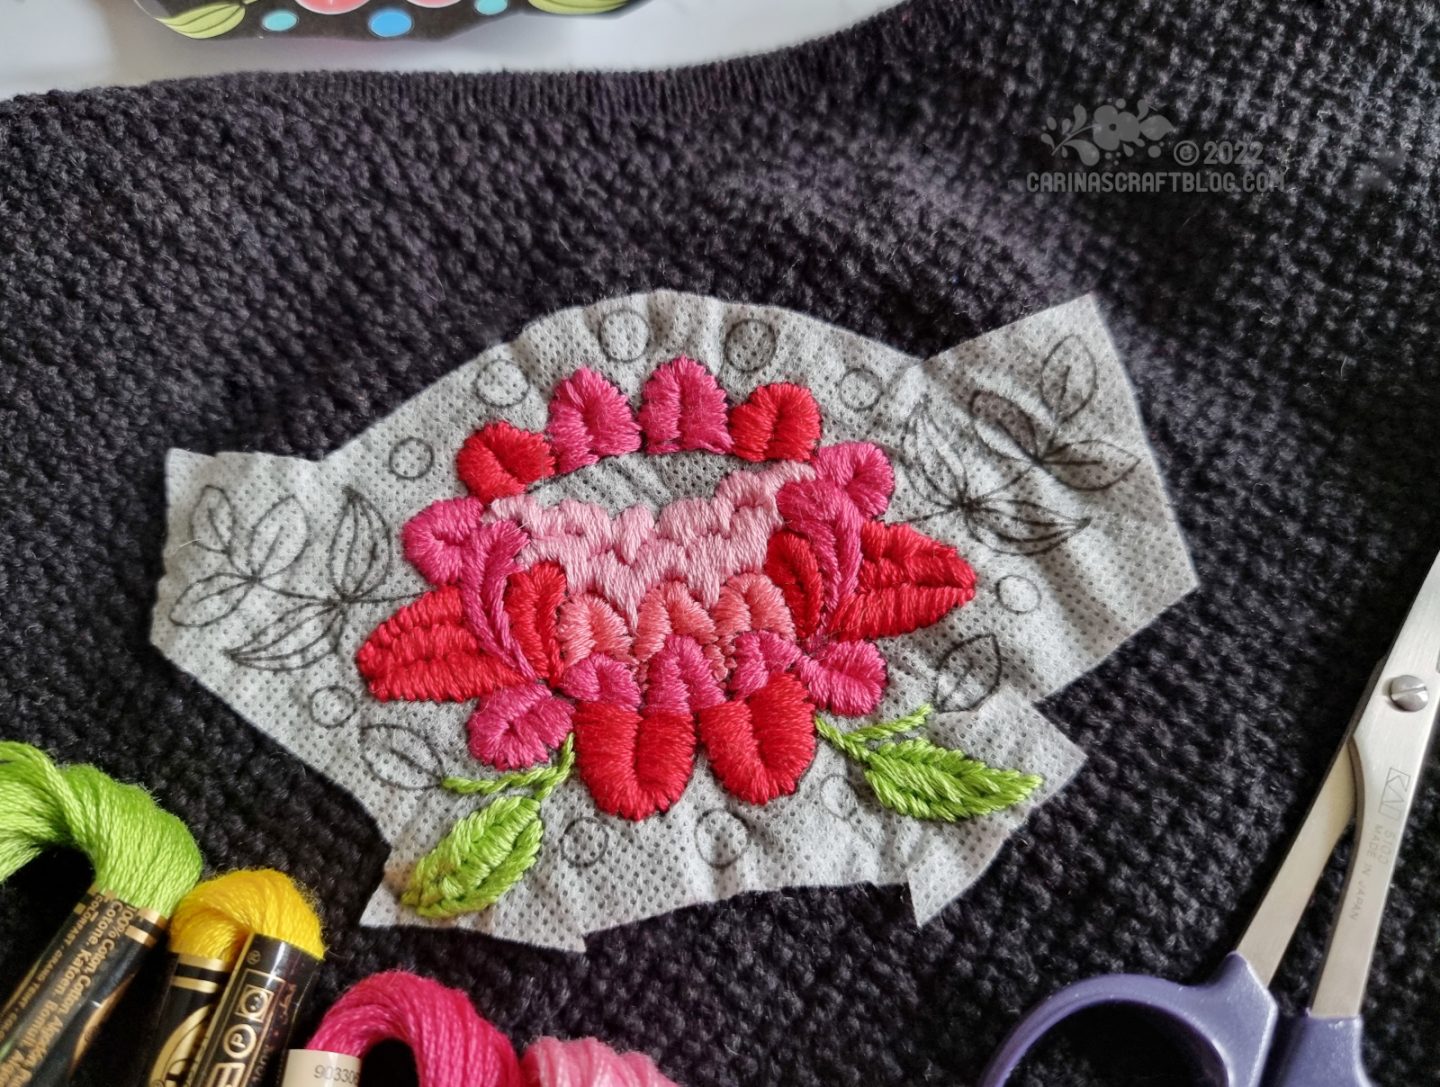 Partially embroidered folk art style flower in pink and red on a black cardigan.